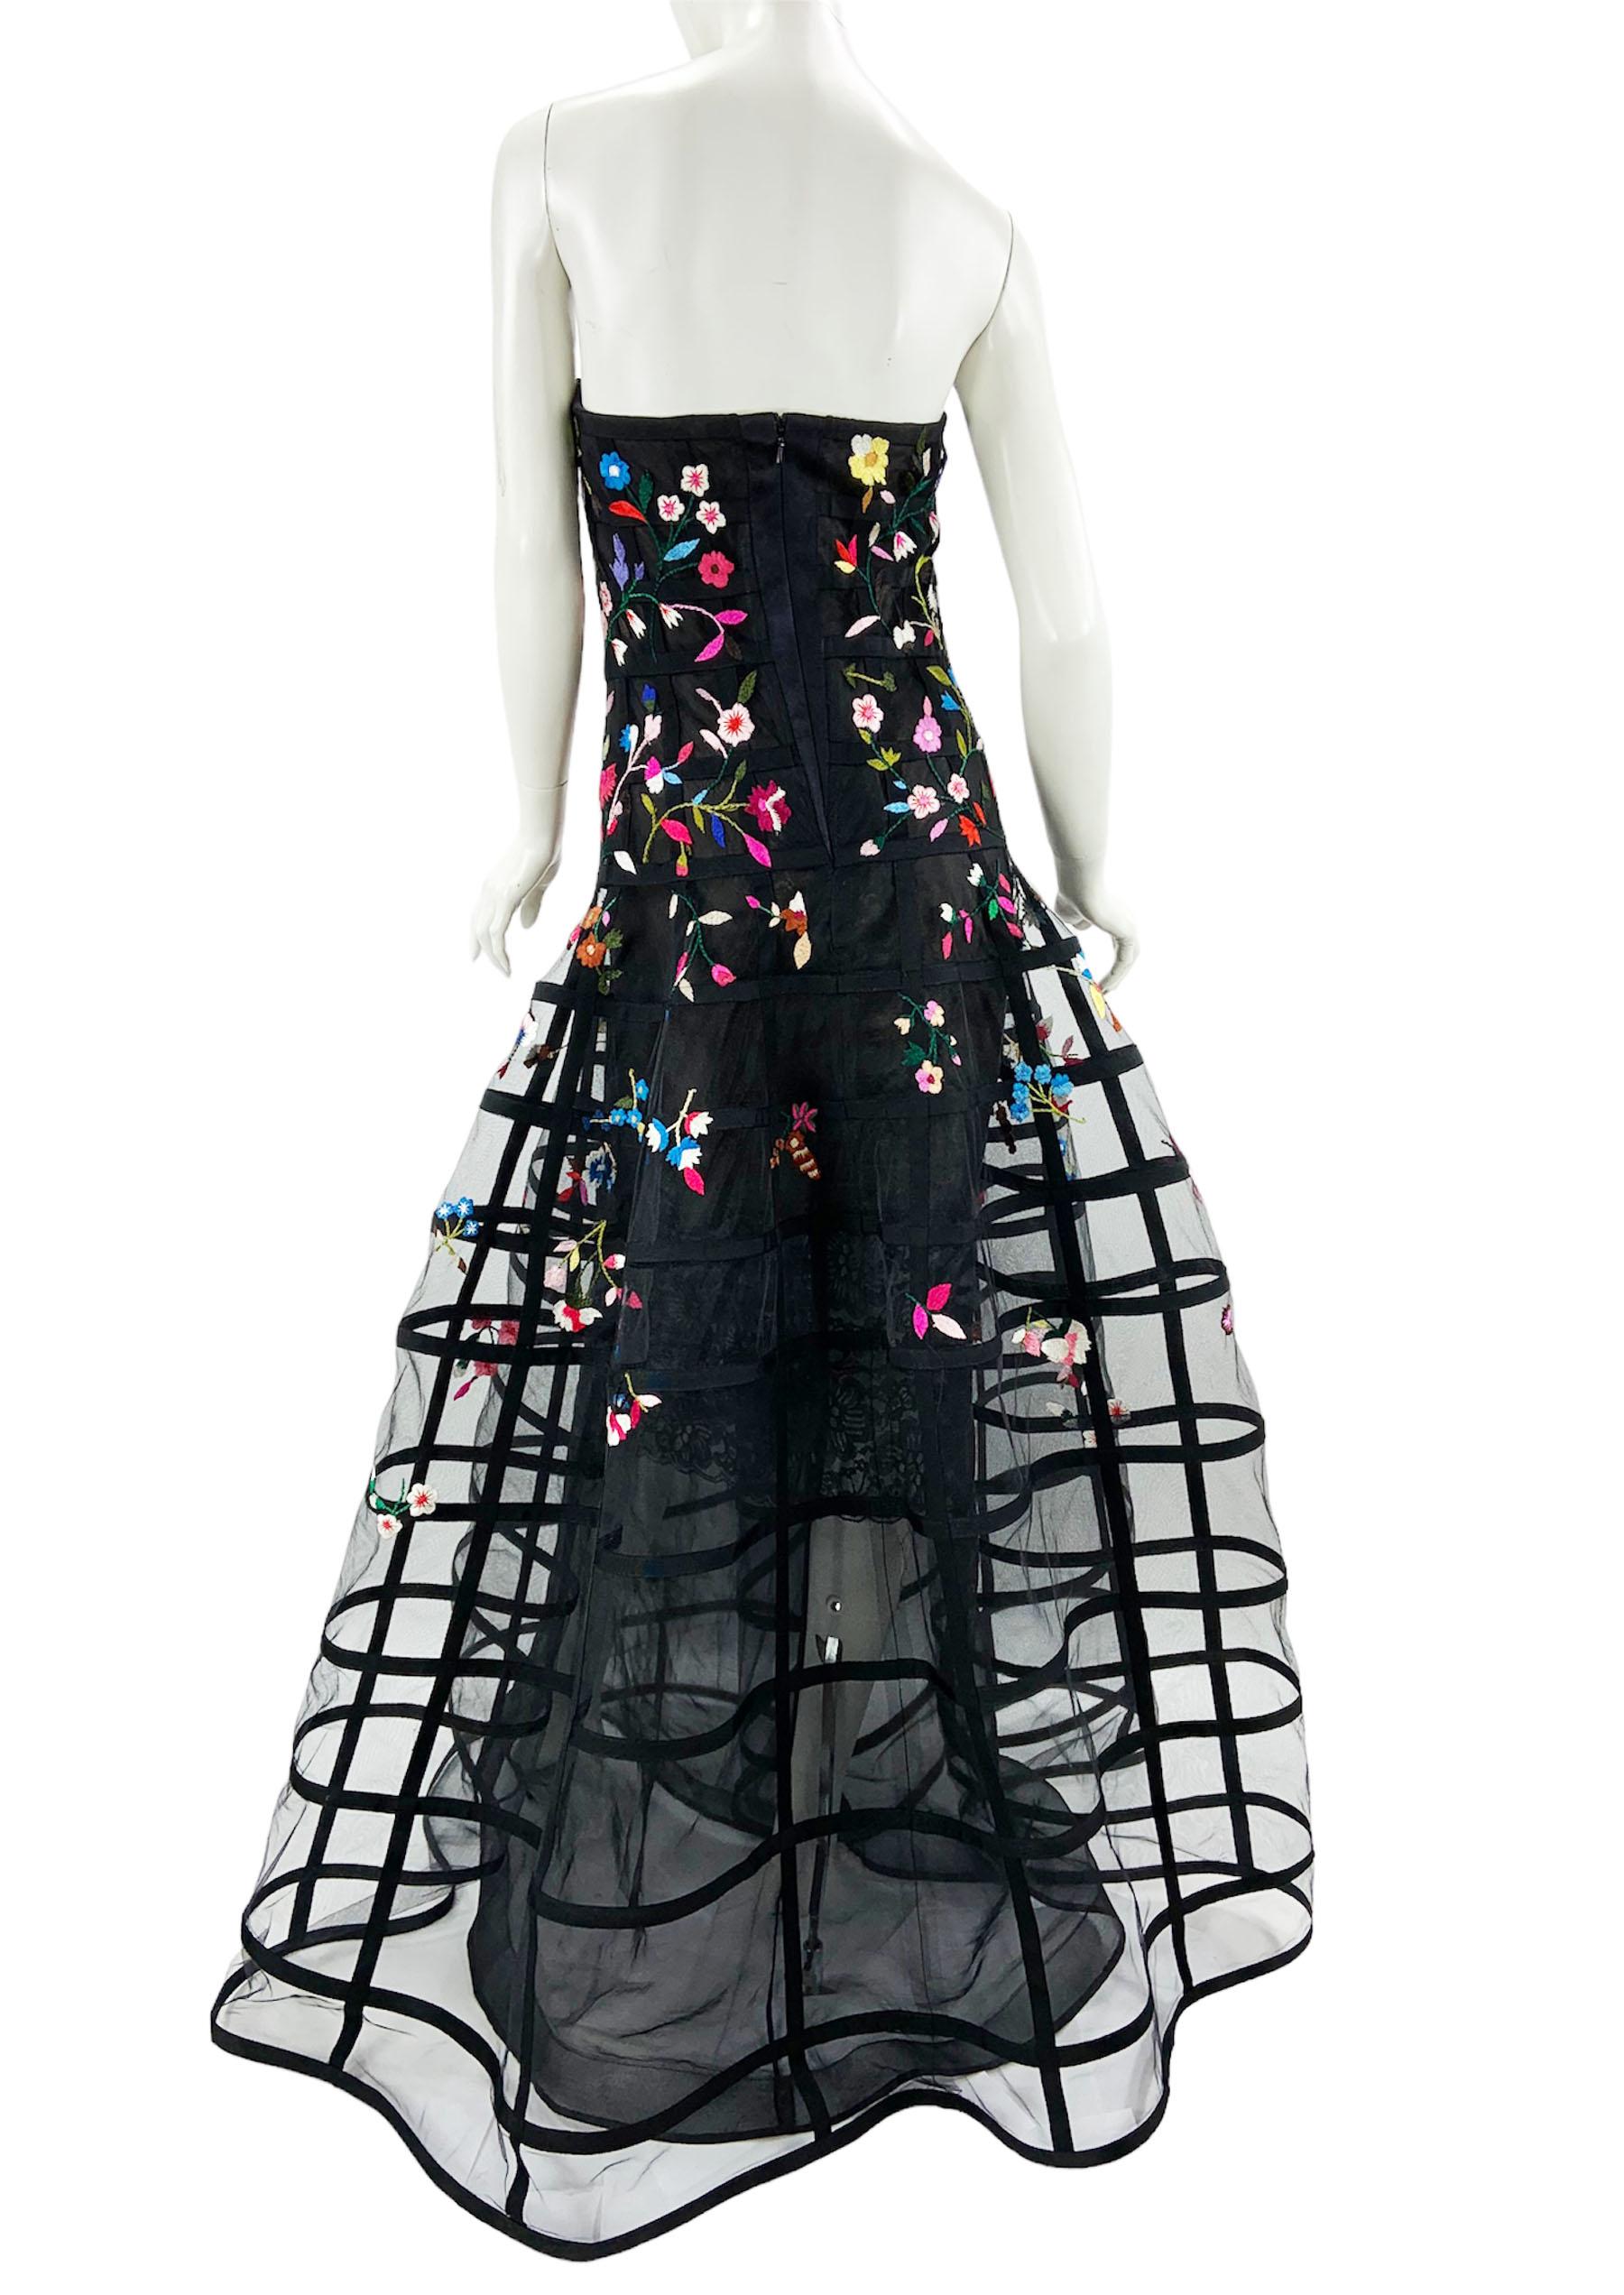 Iconic Oscar de la Renta 2015 Flower Embroidered Cage Corset Dress Gown US 8 In Excellent Condition For Sale In Montgomery, TX